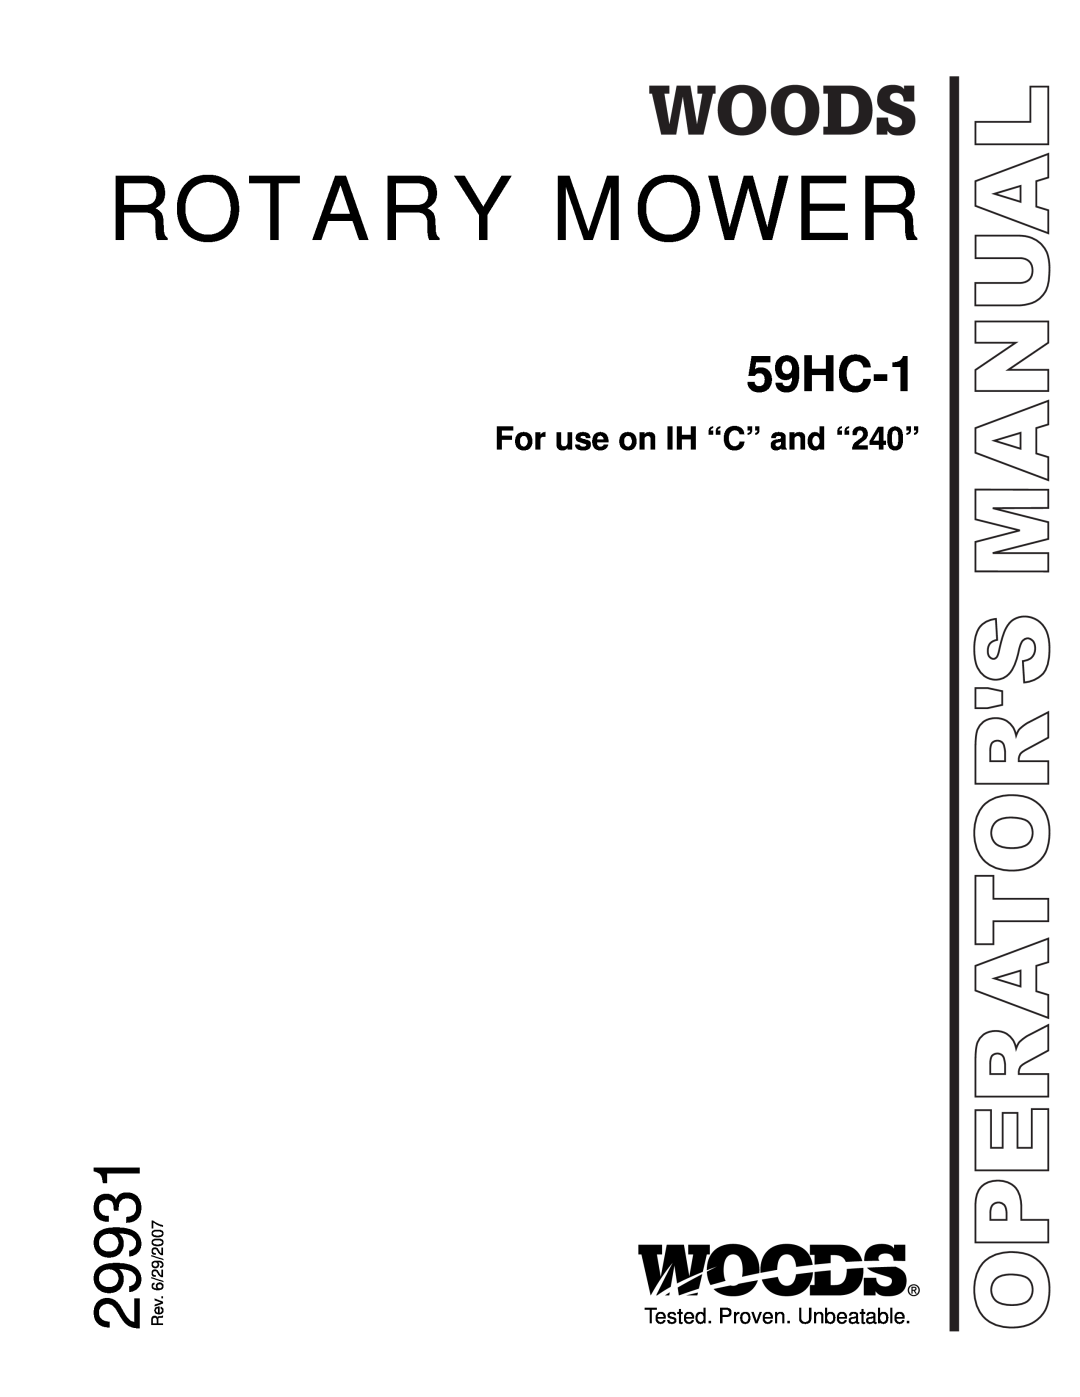 Woods Equipment 59HC-1 manual For use on IH “C” and “240”, Rotary Mower, 29931, Operators Manual 